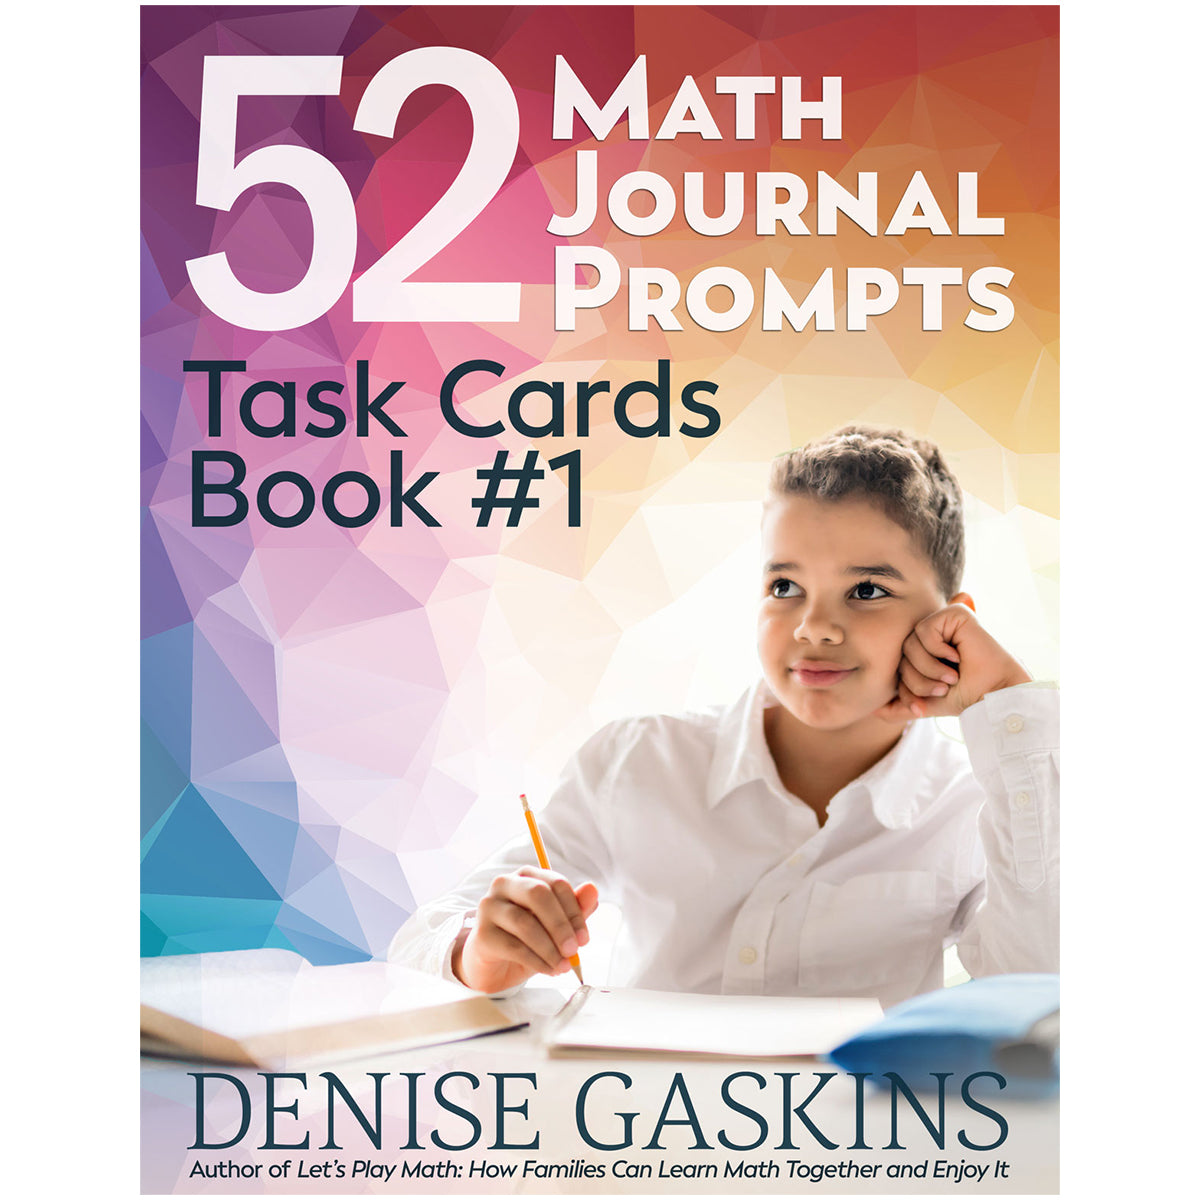 Math Journal Prompts book one printable math activity book by Denise Gaskins